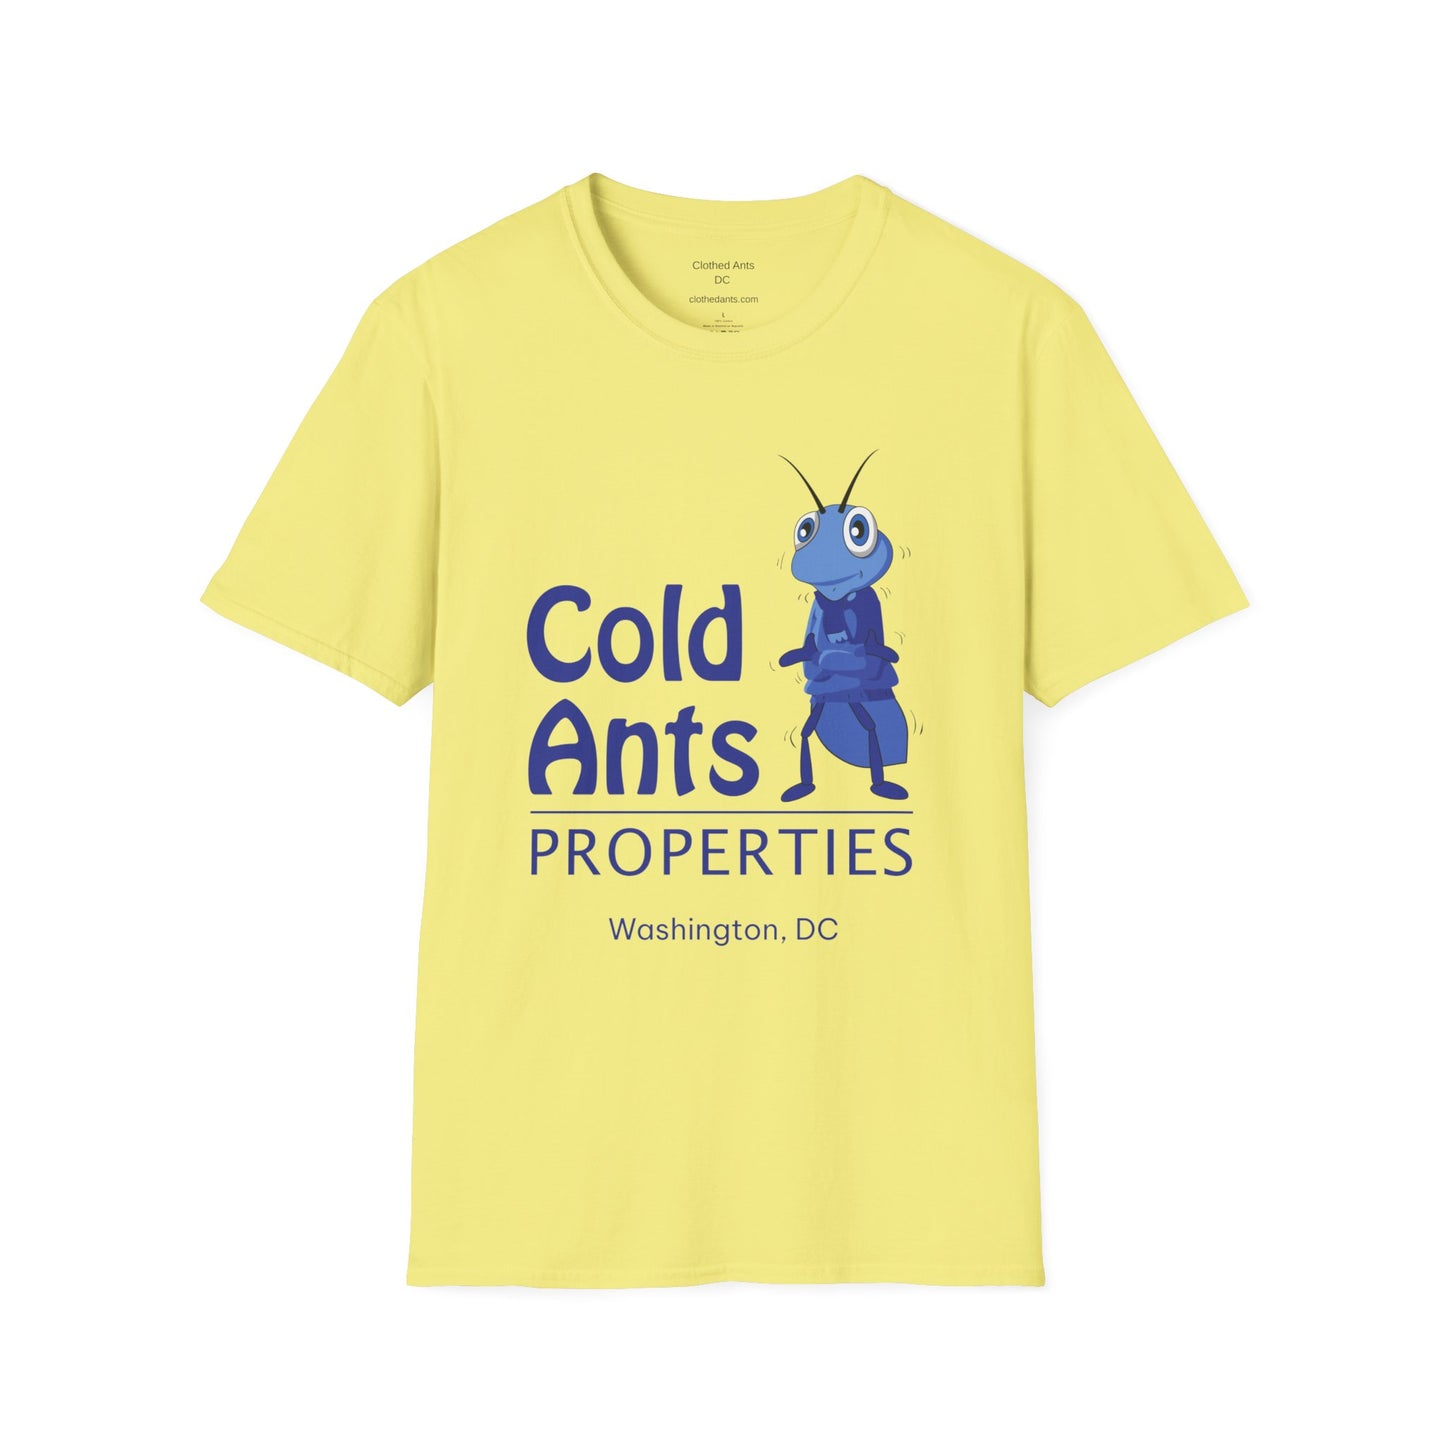 Cold Ants Properties - DC